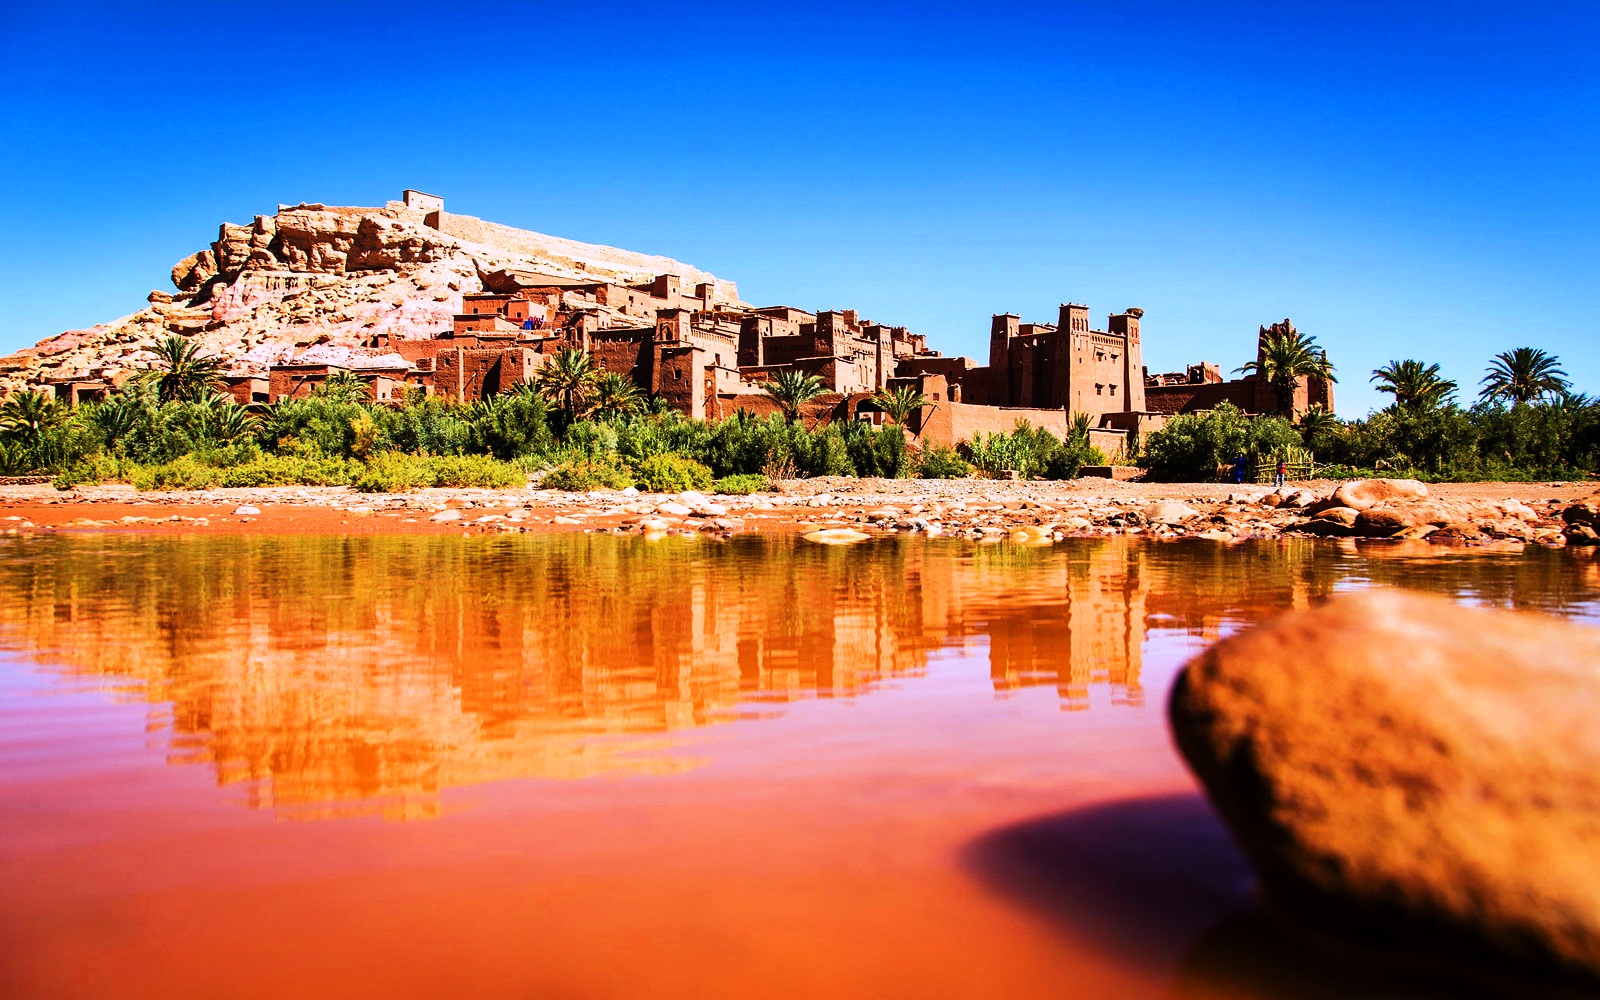 Morocco day trip to Ait Ben haddaou Kasbah and Ouarzazate from Marrakech